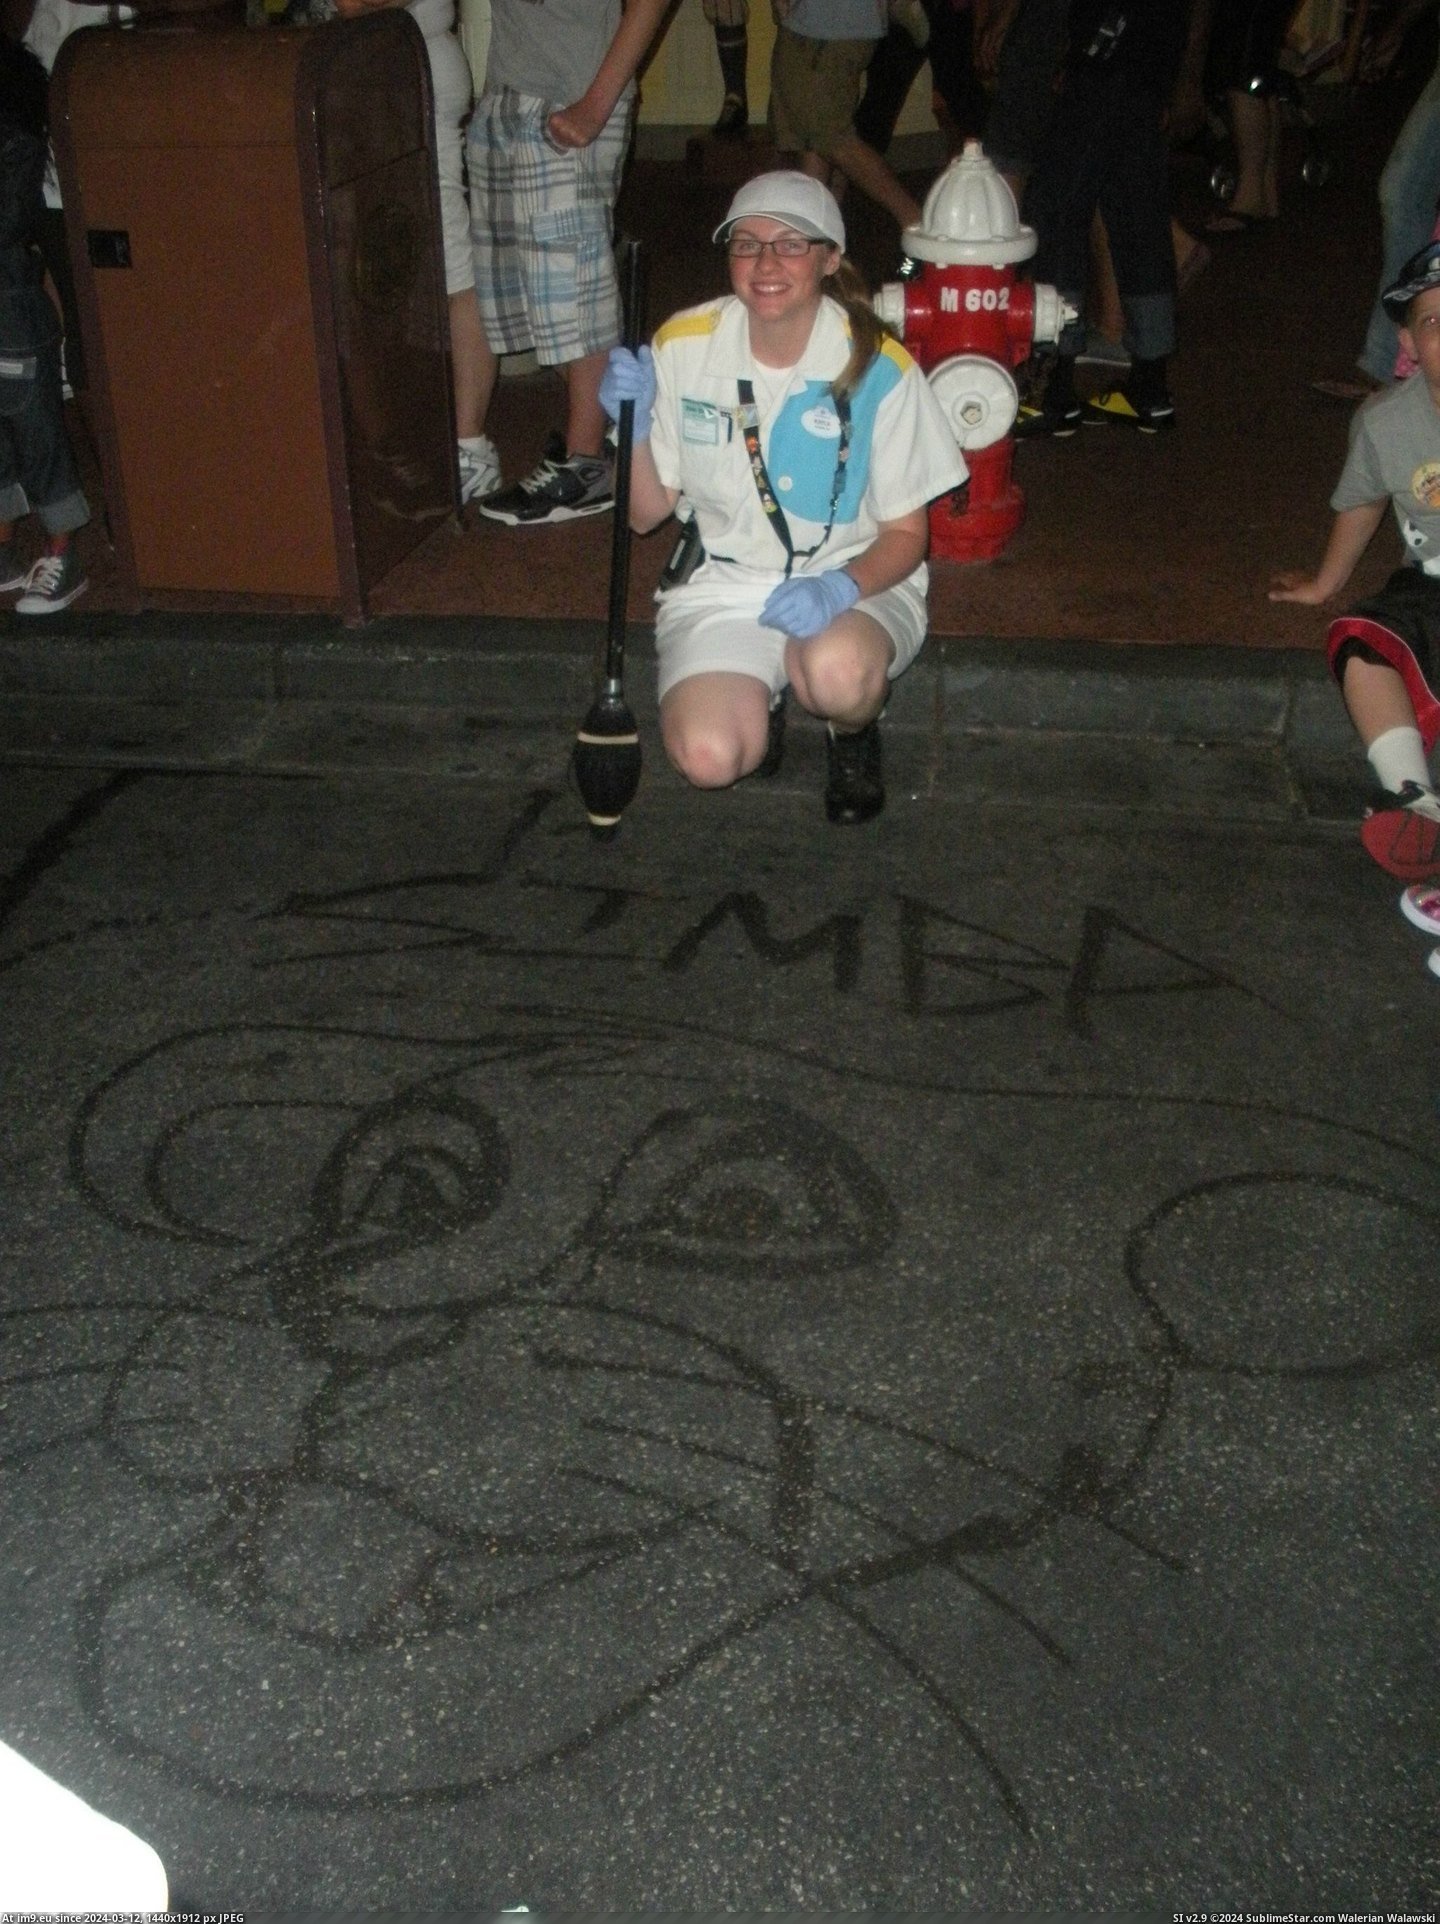 #World #Water #Disney #Guests #Janitor #Broom #Entertain #Characters #Drew #Sidewalk [Pics] As a janitor at Disney World, I drew characters with water and a broom on the sidewalk to entertain guests. 7 Pic. (Image of album My r/PICS favs))